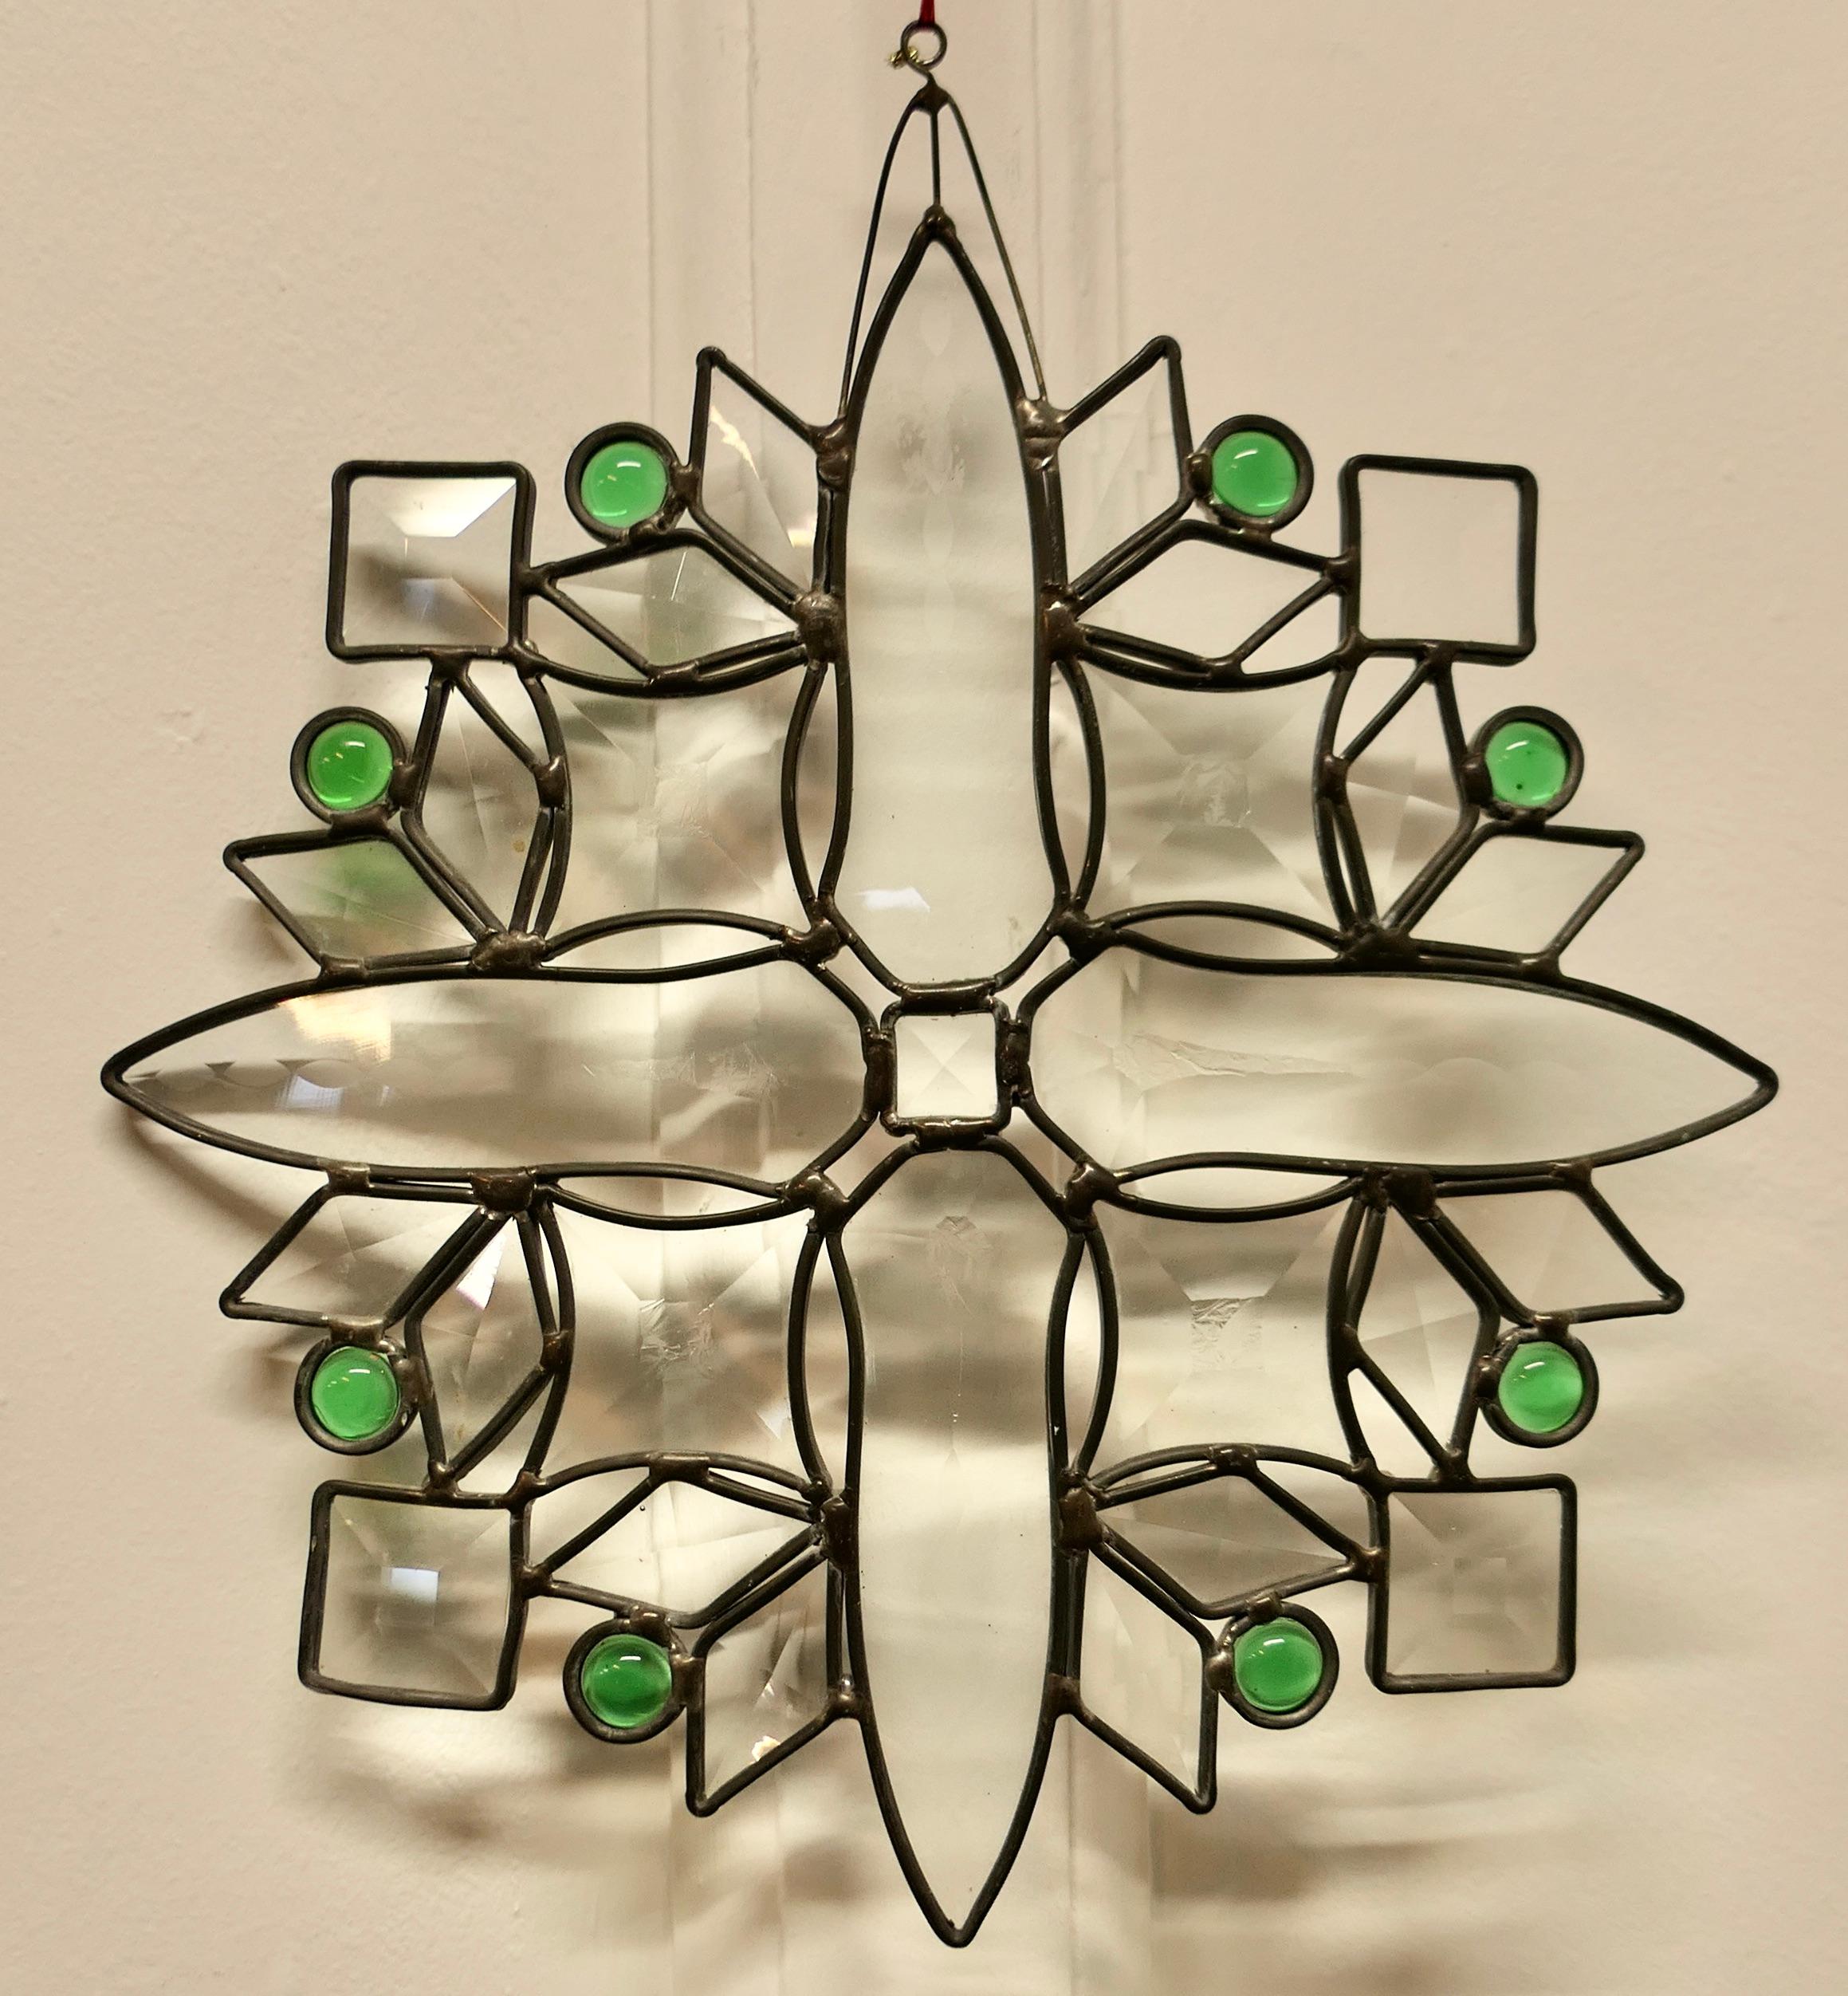 French Hand Made Antique Stained Glass Window Panel

This lovely Artisan made piece has been made from 19th century Jewel Etched  and Faceted Glass, skilfully set to make a star shaped pattern
The Panel is a one off, there is only one like this one,